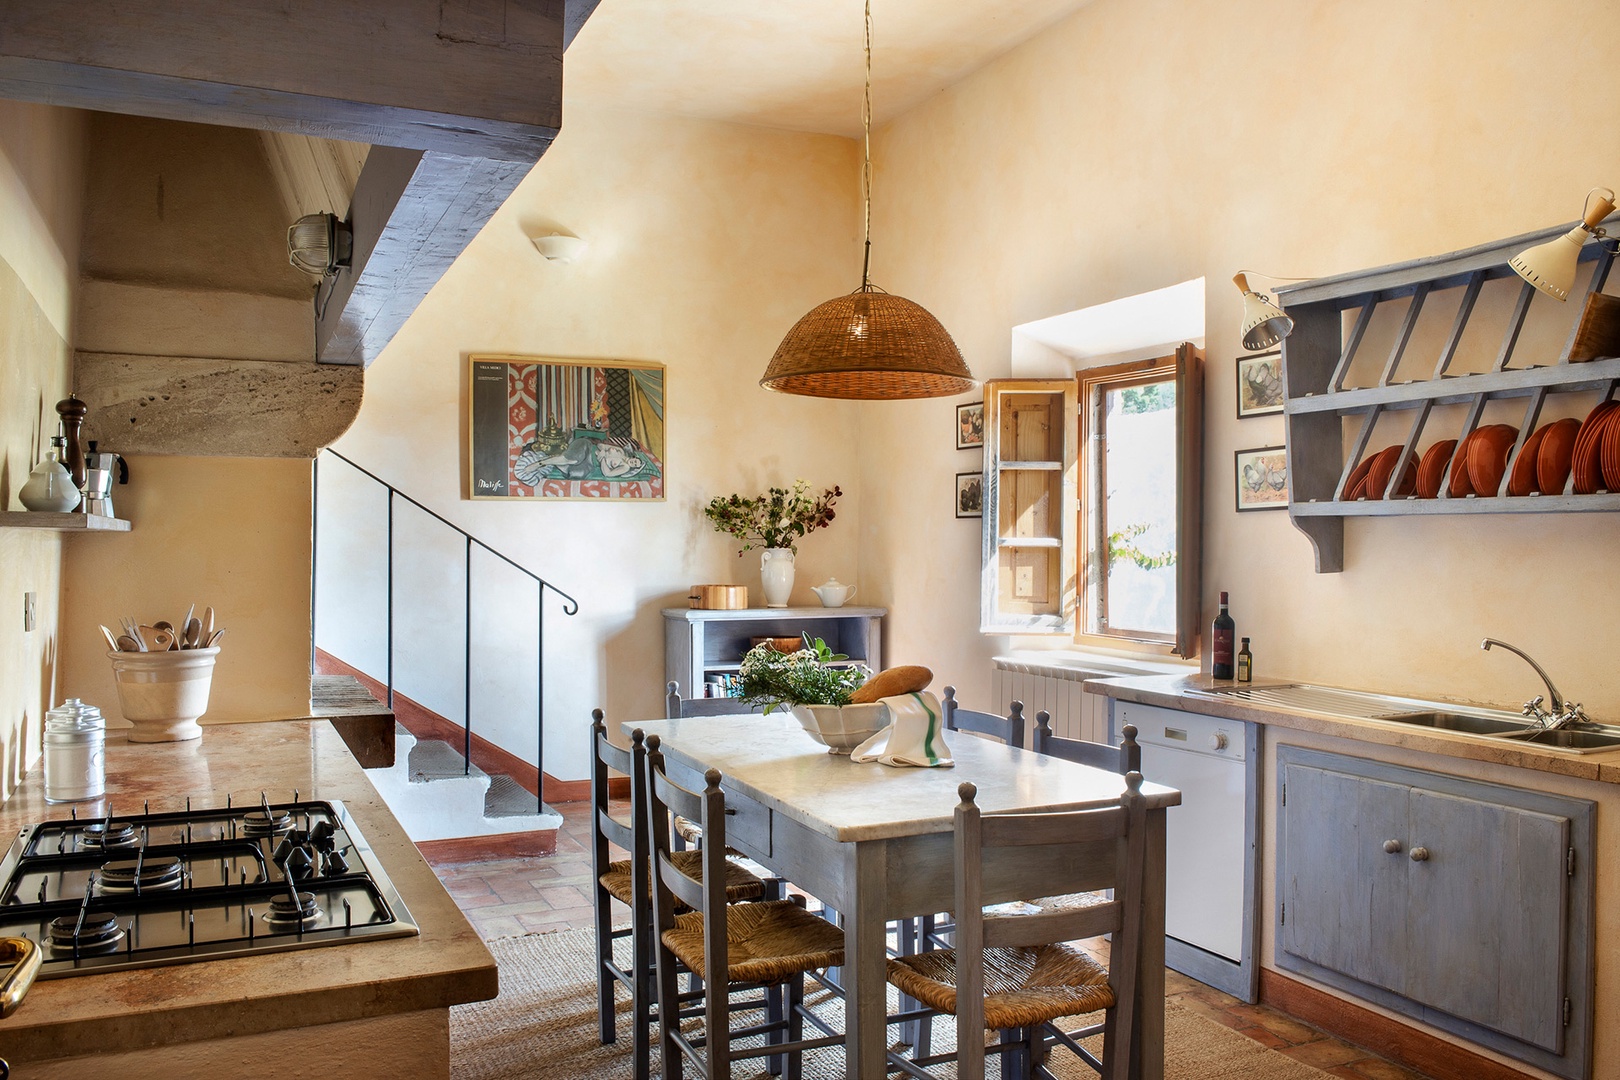 Eat-in country kitchen with a dining table seating 6.